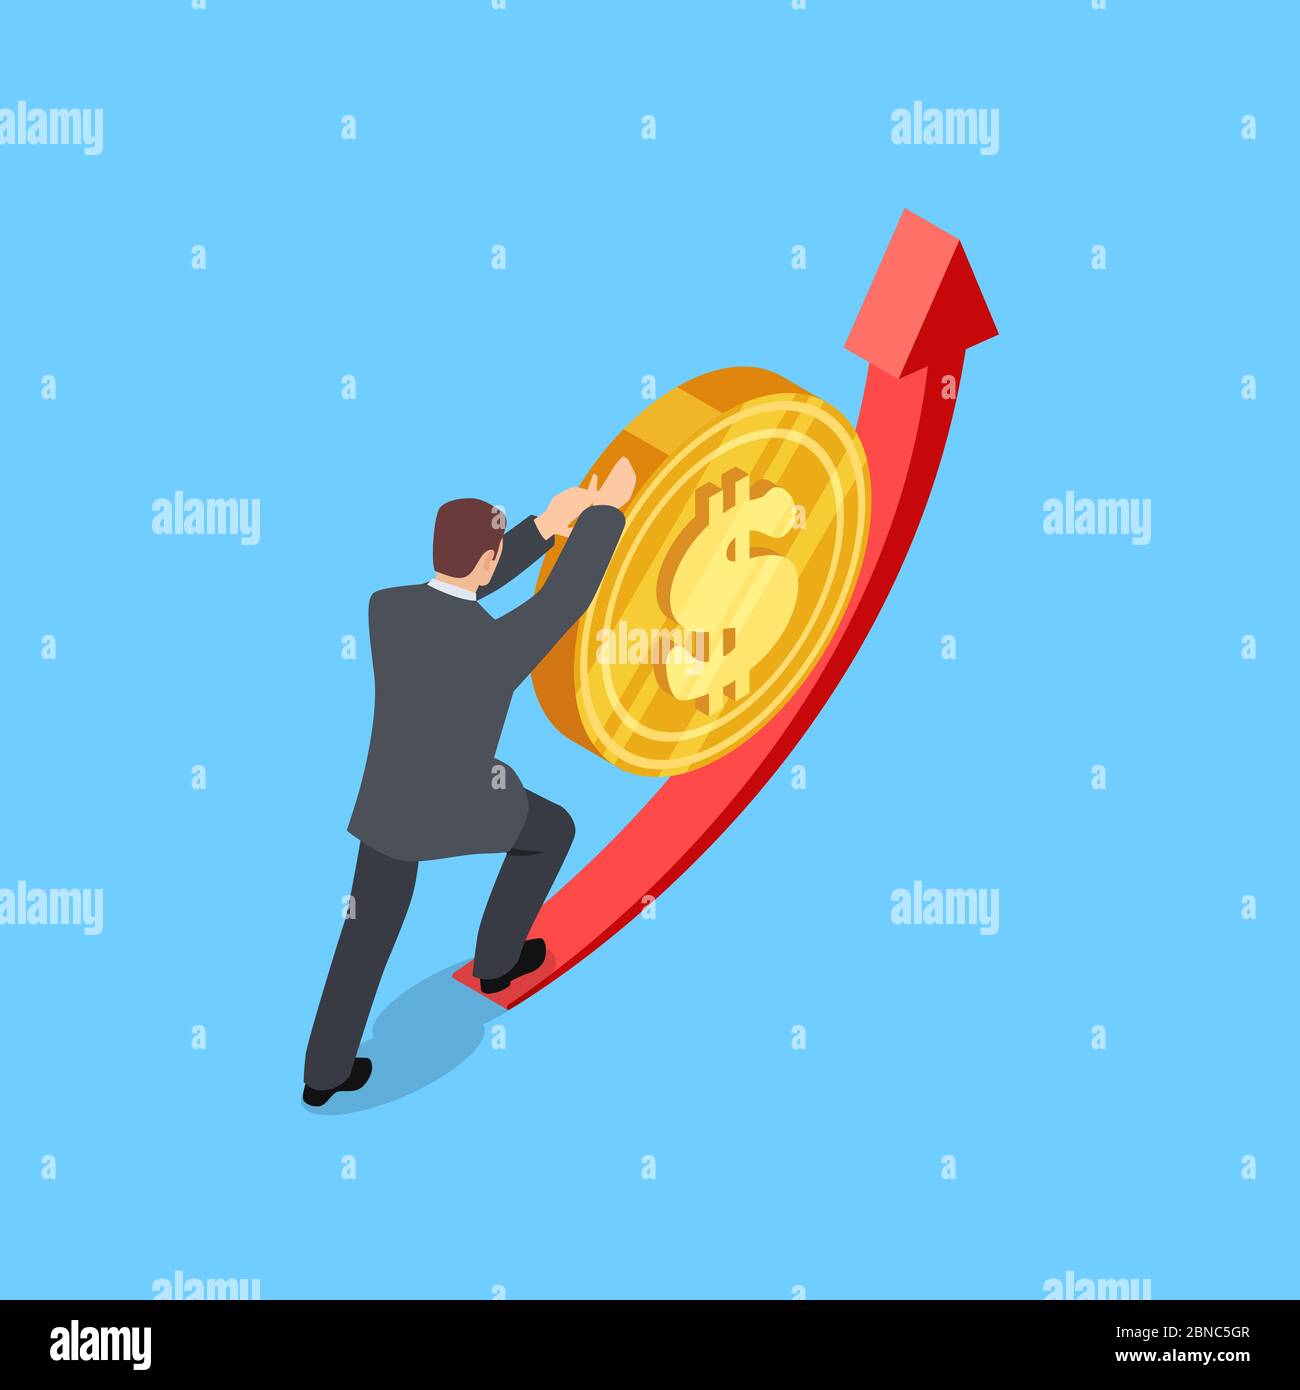 Man helps the dollar to rise vector illustration. Finance isometric concept. Leadership climb and push golden coins Stock Vector